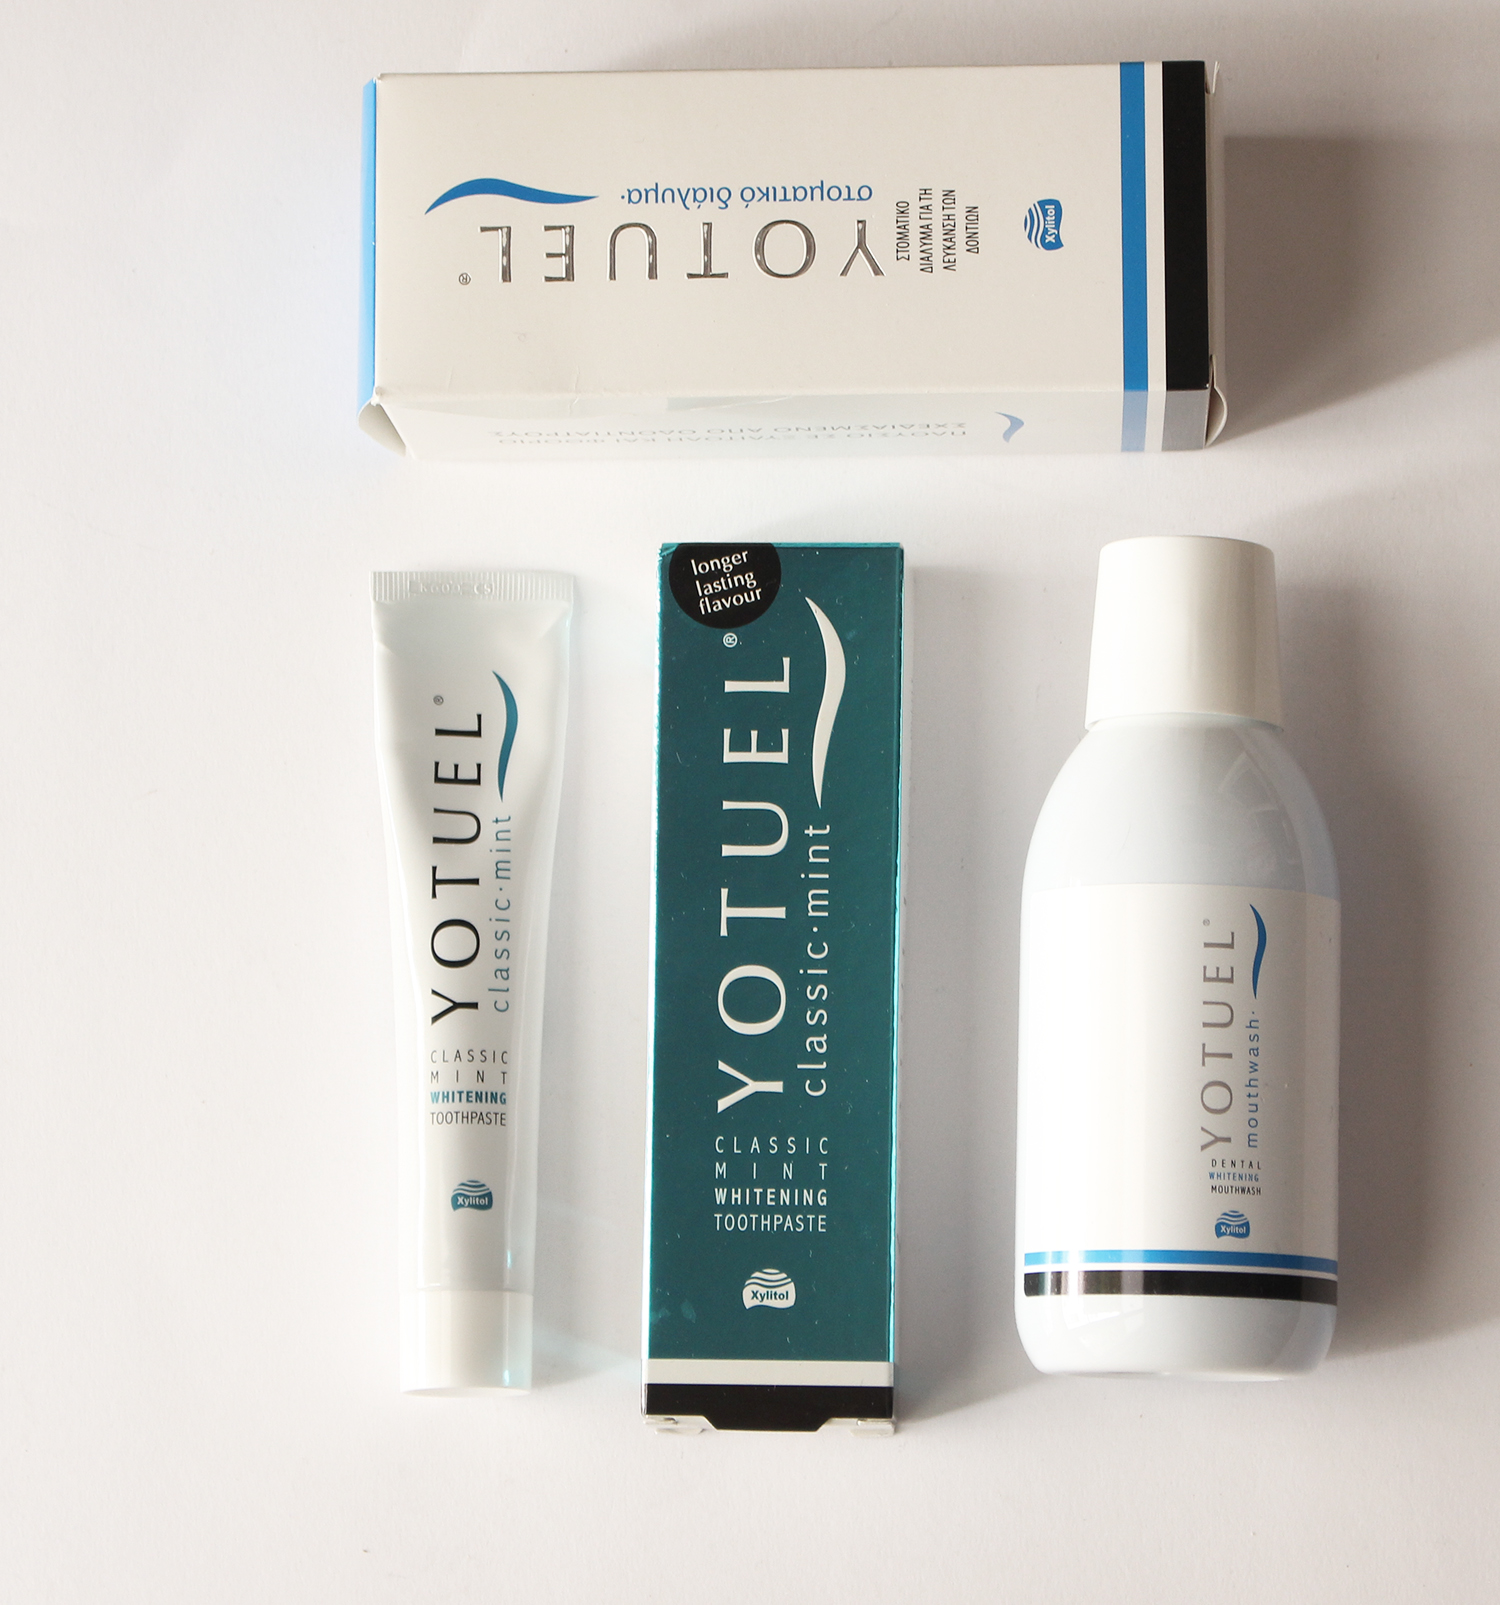 yotuel-toothpaste-review